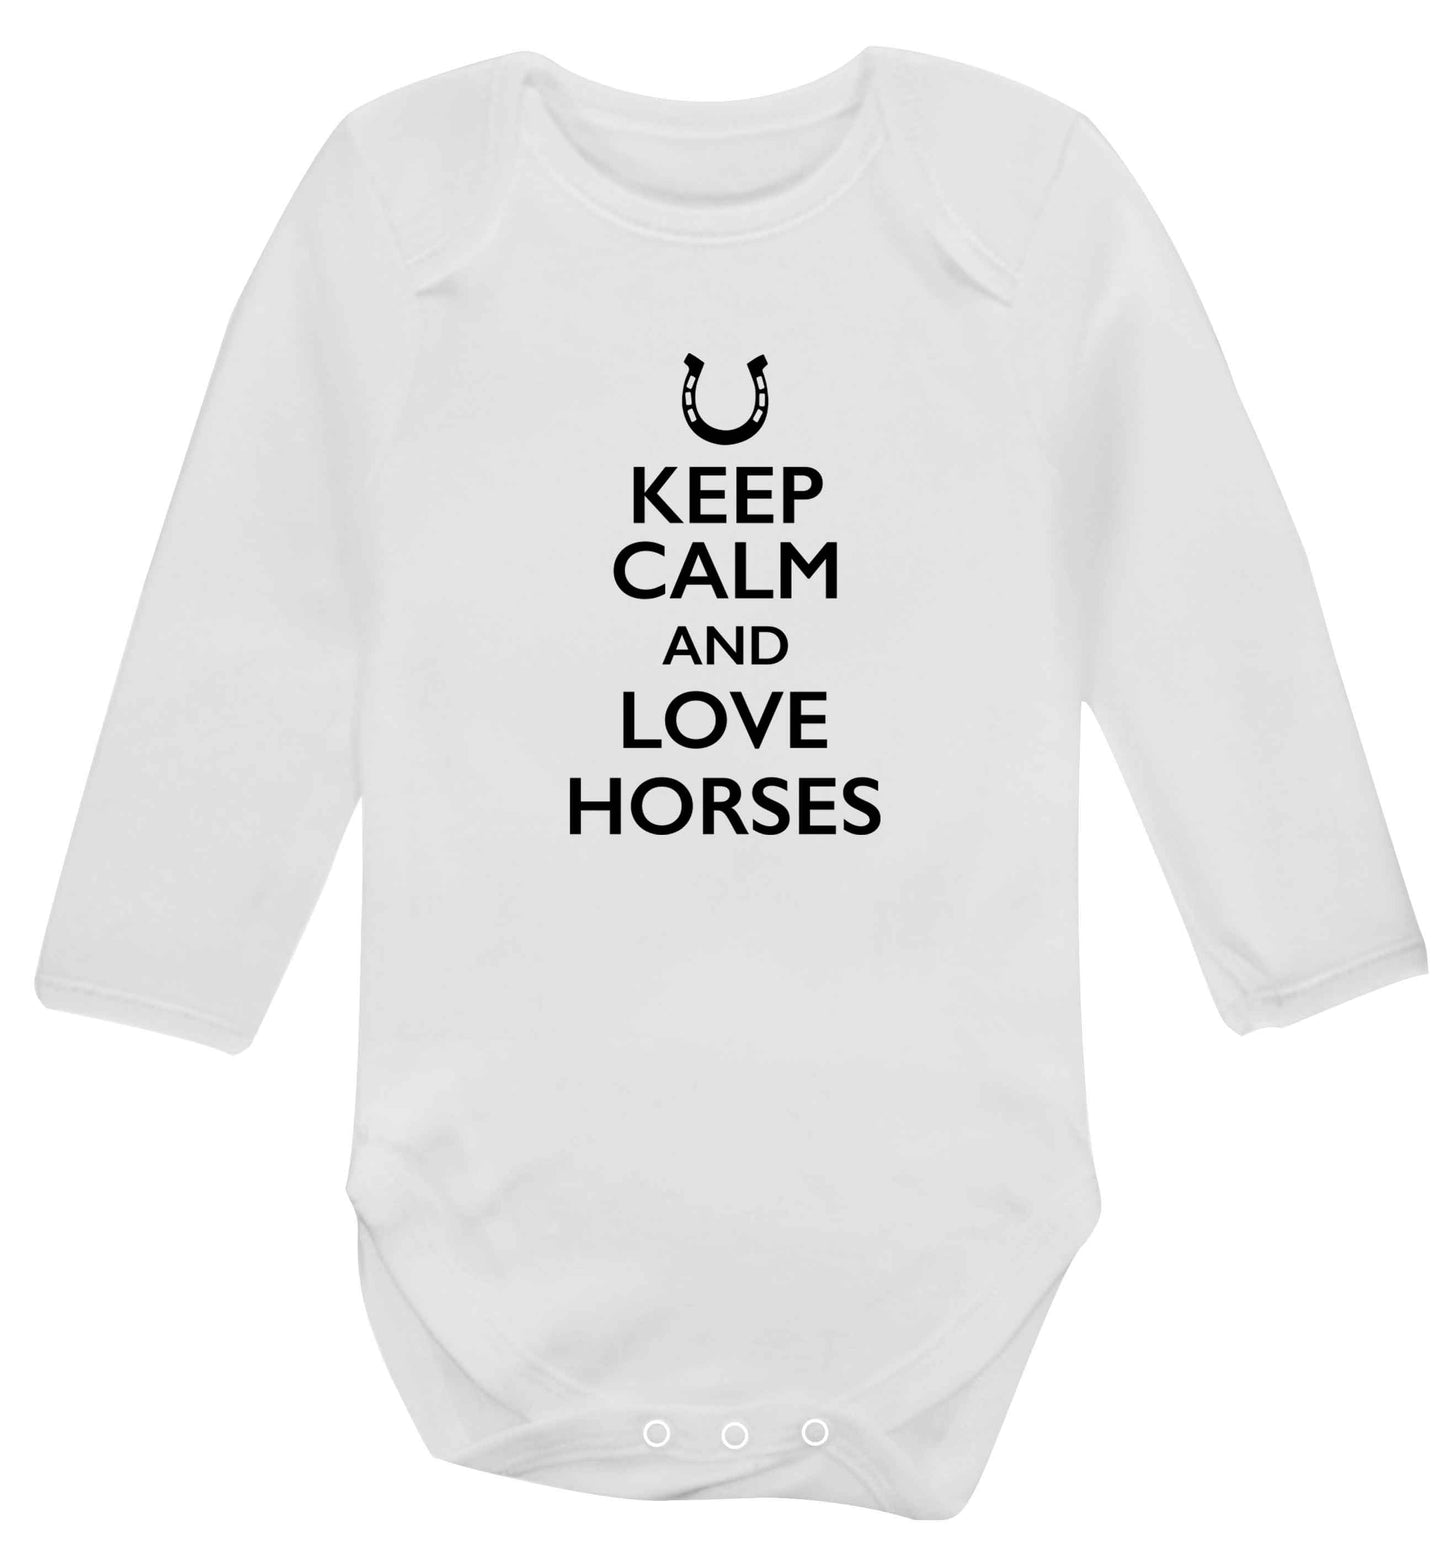 Keep calm and love horses baby vest long sleeved white 6-12 months